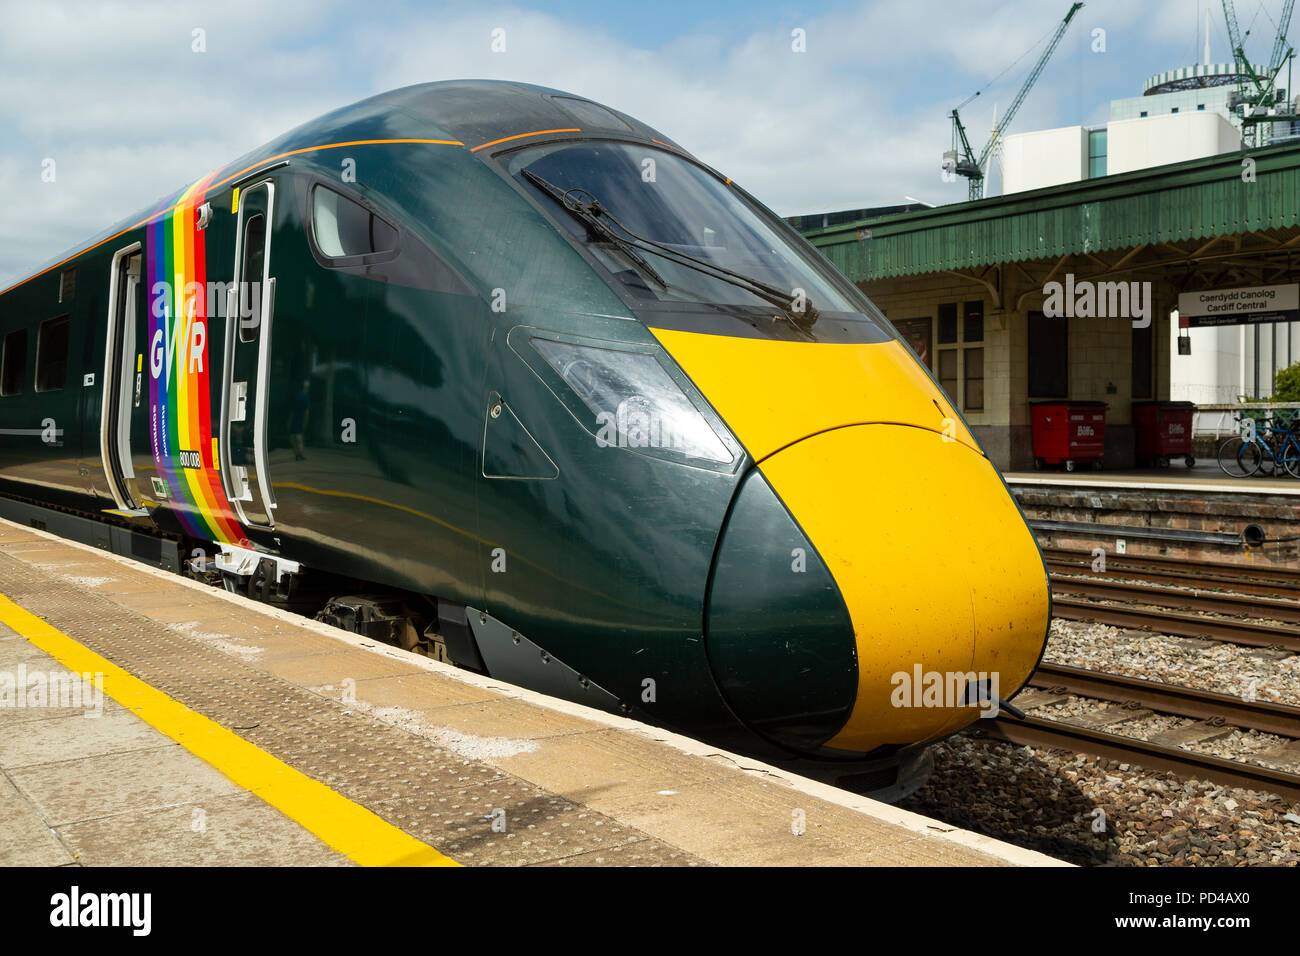 Hitachi Class 800 trainset operated by Great Western Railway under the Department for Transport’s Intercity Express Programme standing at Cardiff Stock Photo